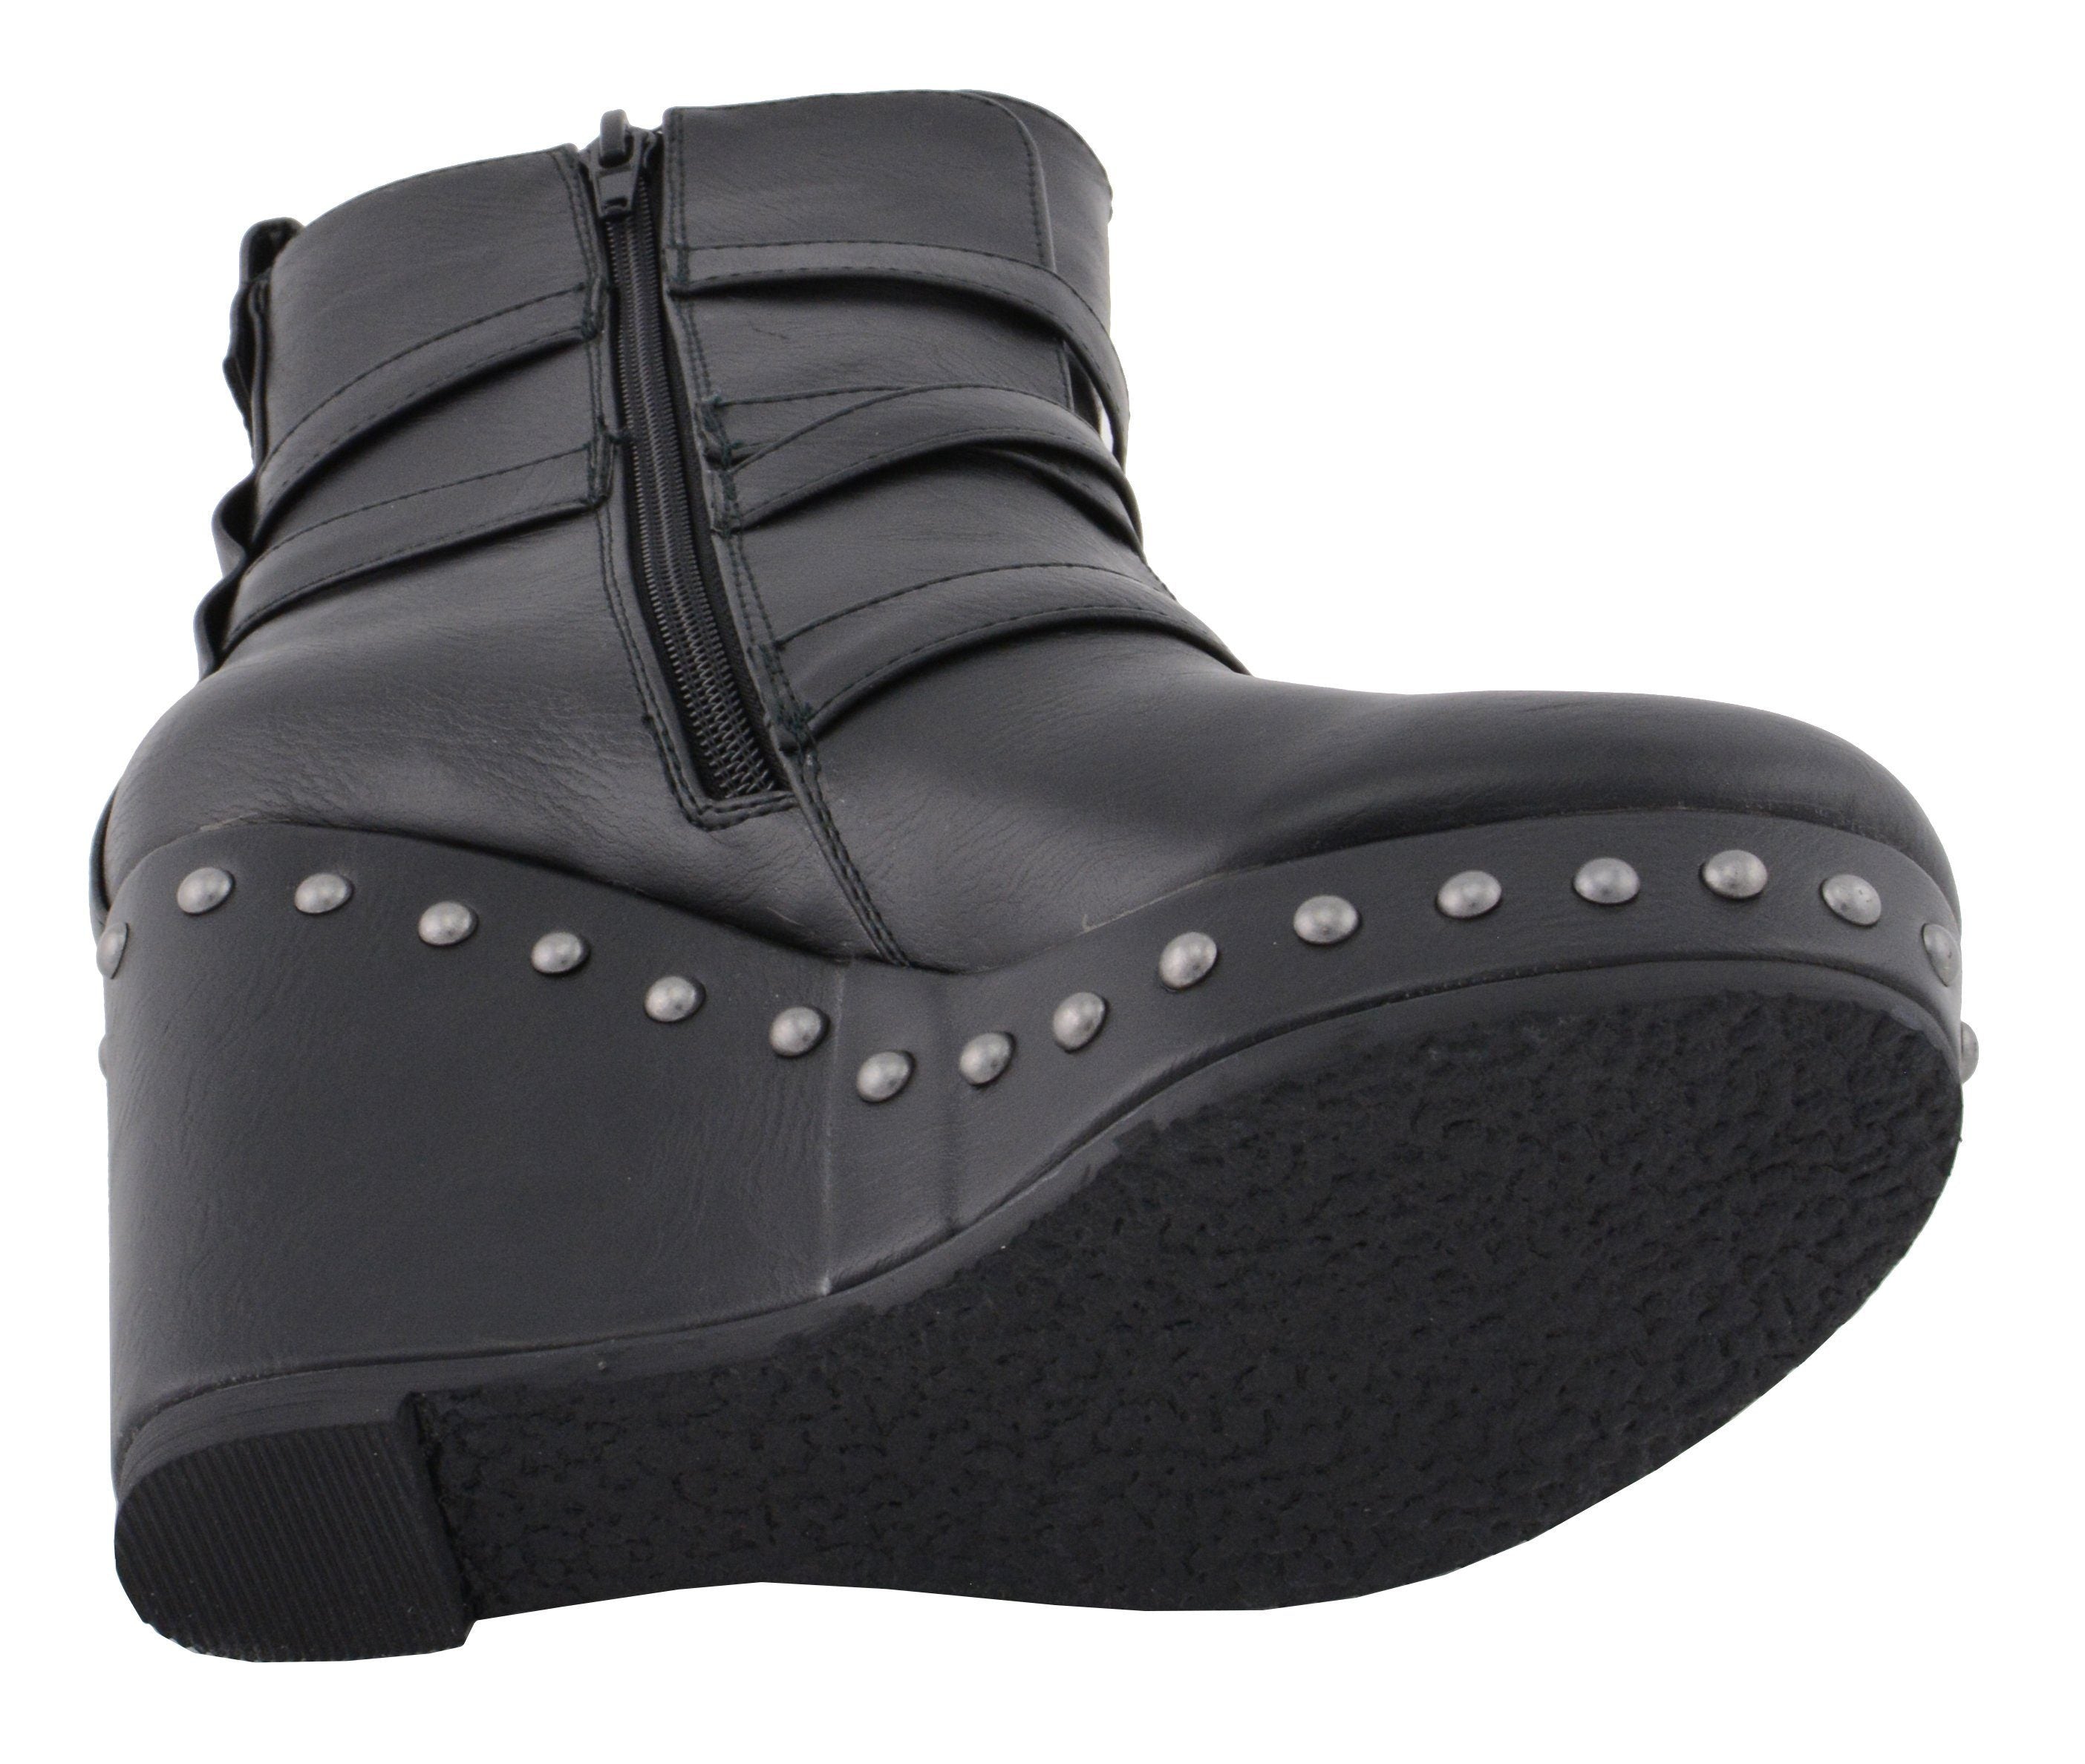 Milwaukee Performance MBL9437 Women's Black Triple Strap Boots with Platform Wedge